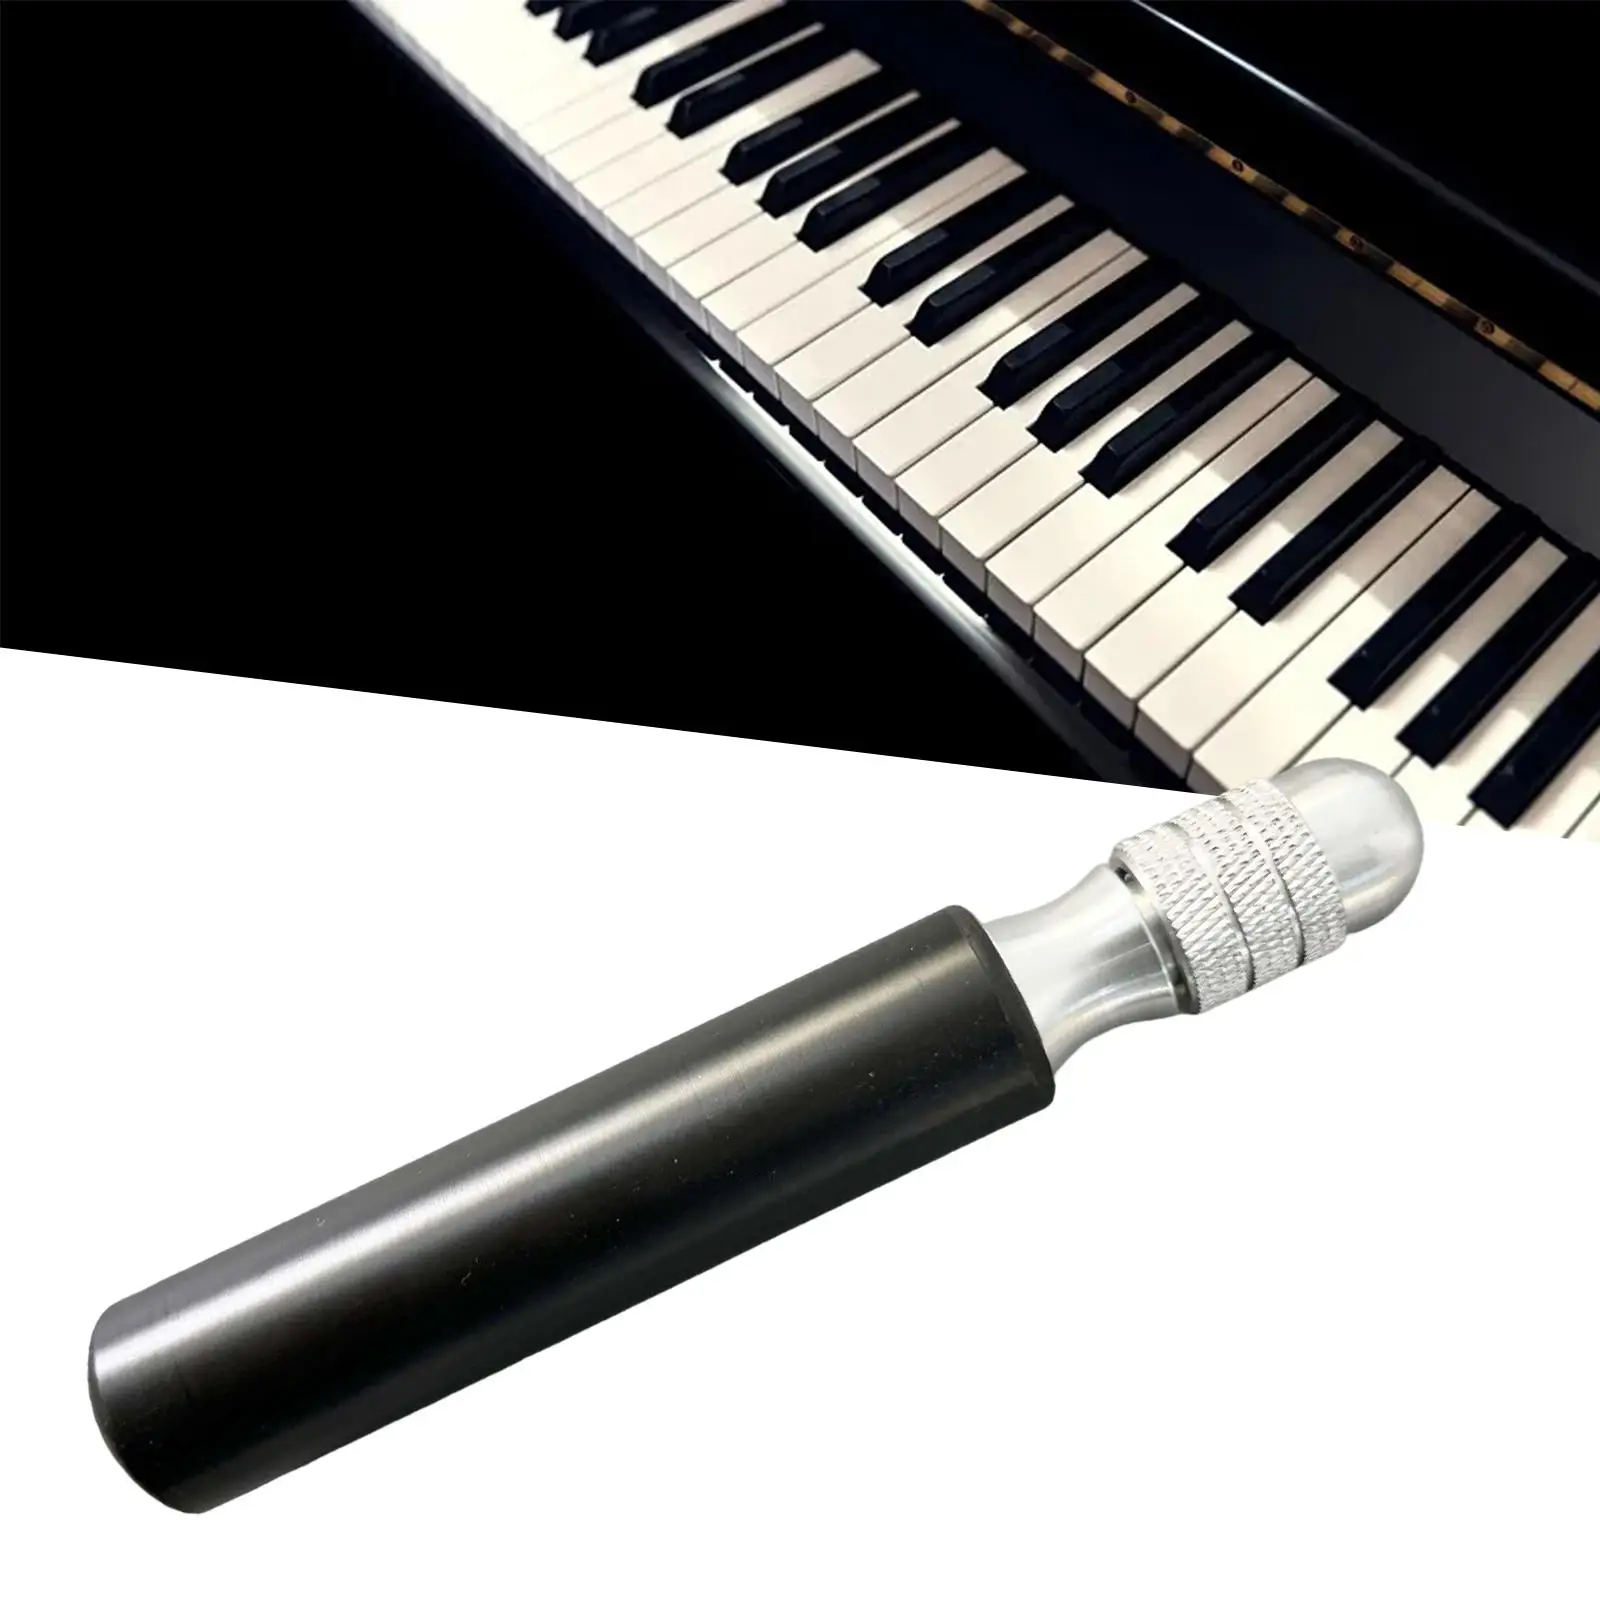 Professional Piano Tuning Tool Lightweight Portable Hand Tools for Adults